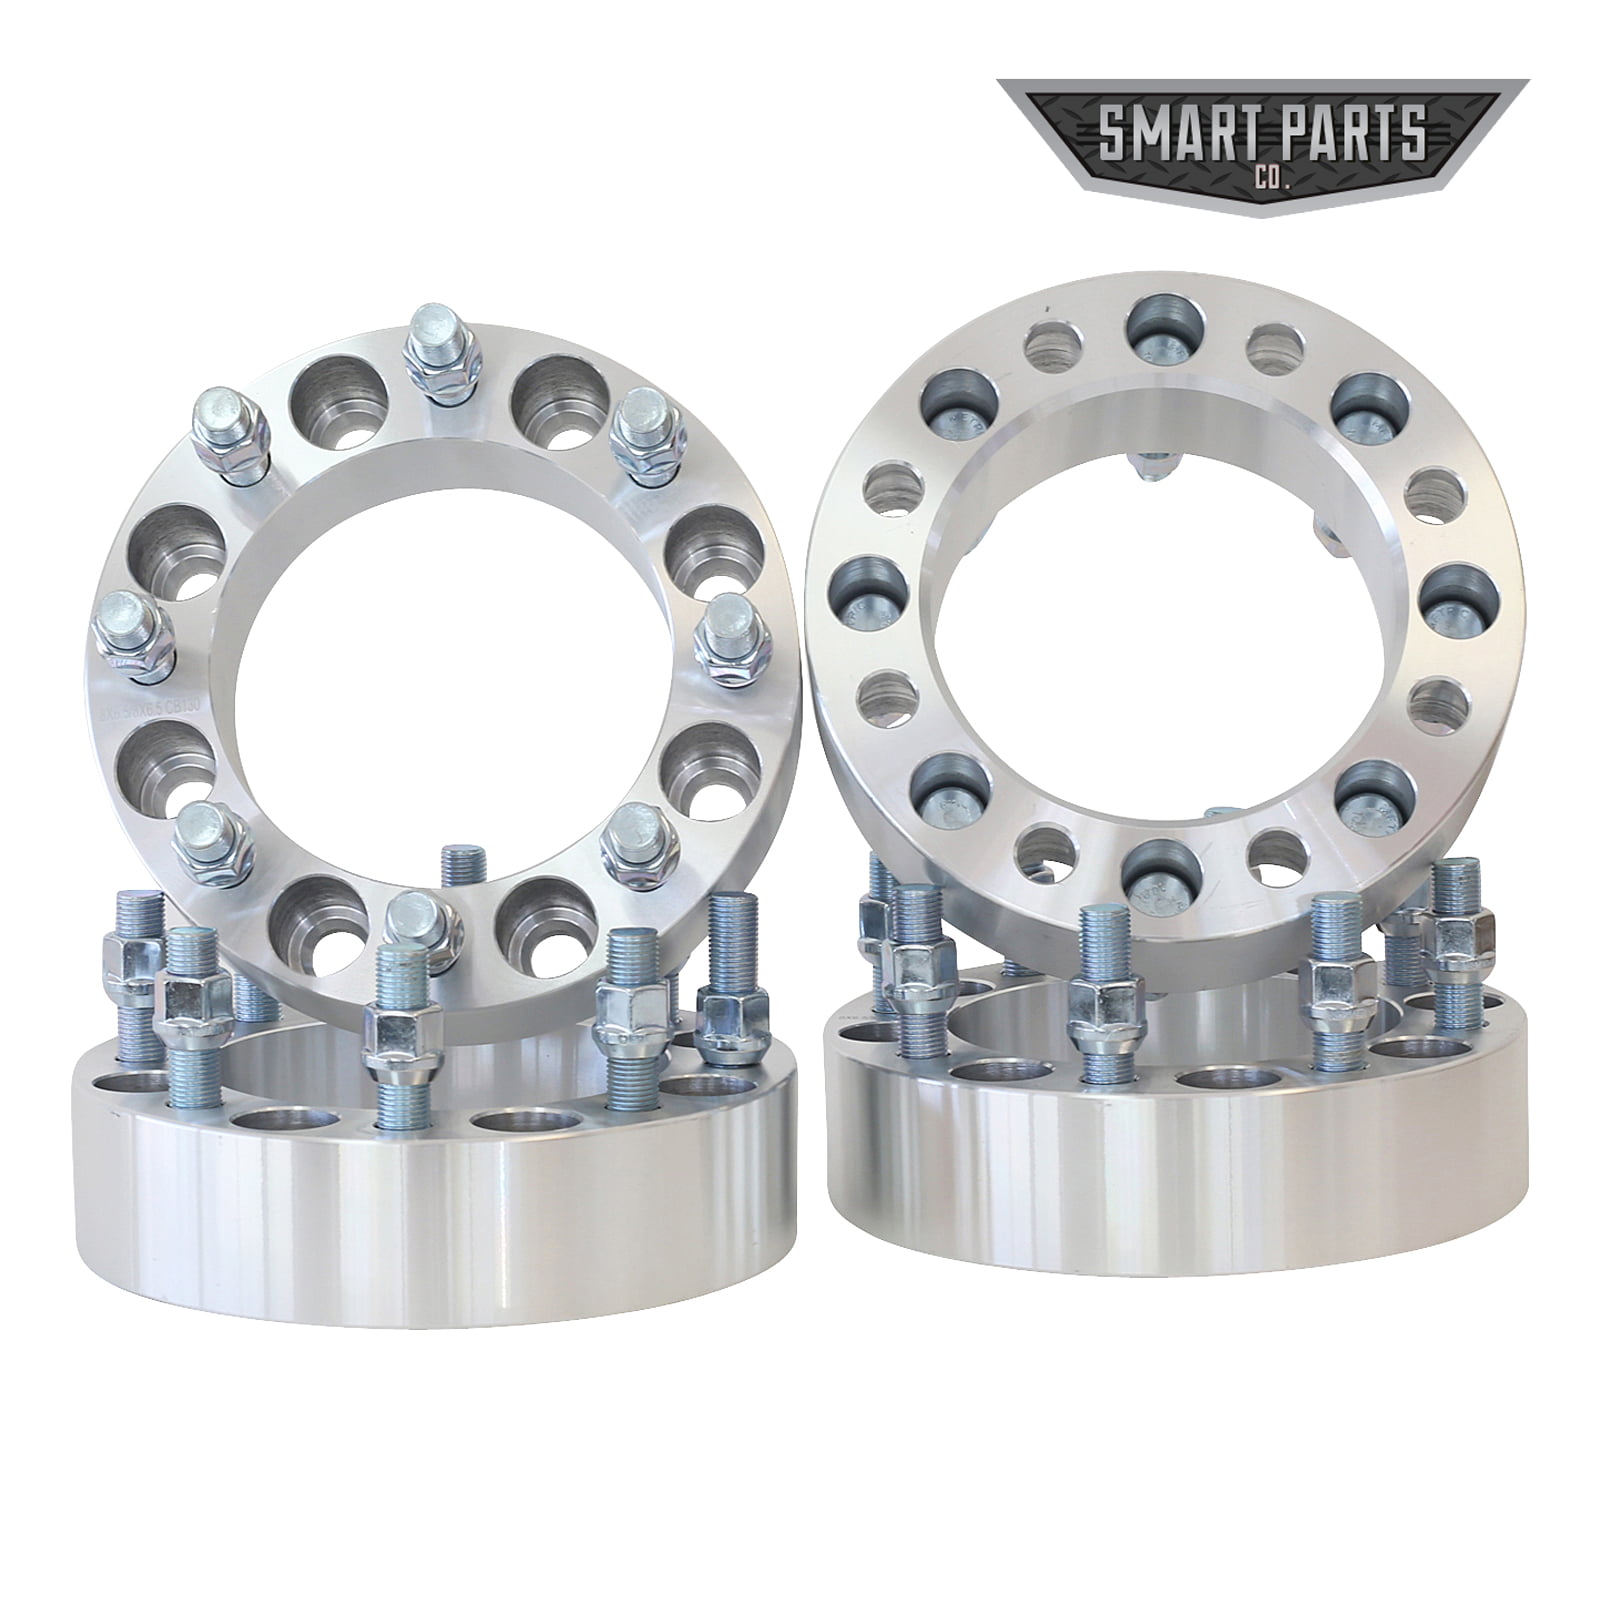 1'' 8 Lug Wheel Spacers Adapters 8x6.5 fits Nissan Chevy C/K-2500/3500 GMC 1